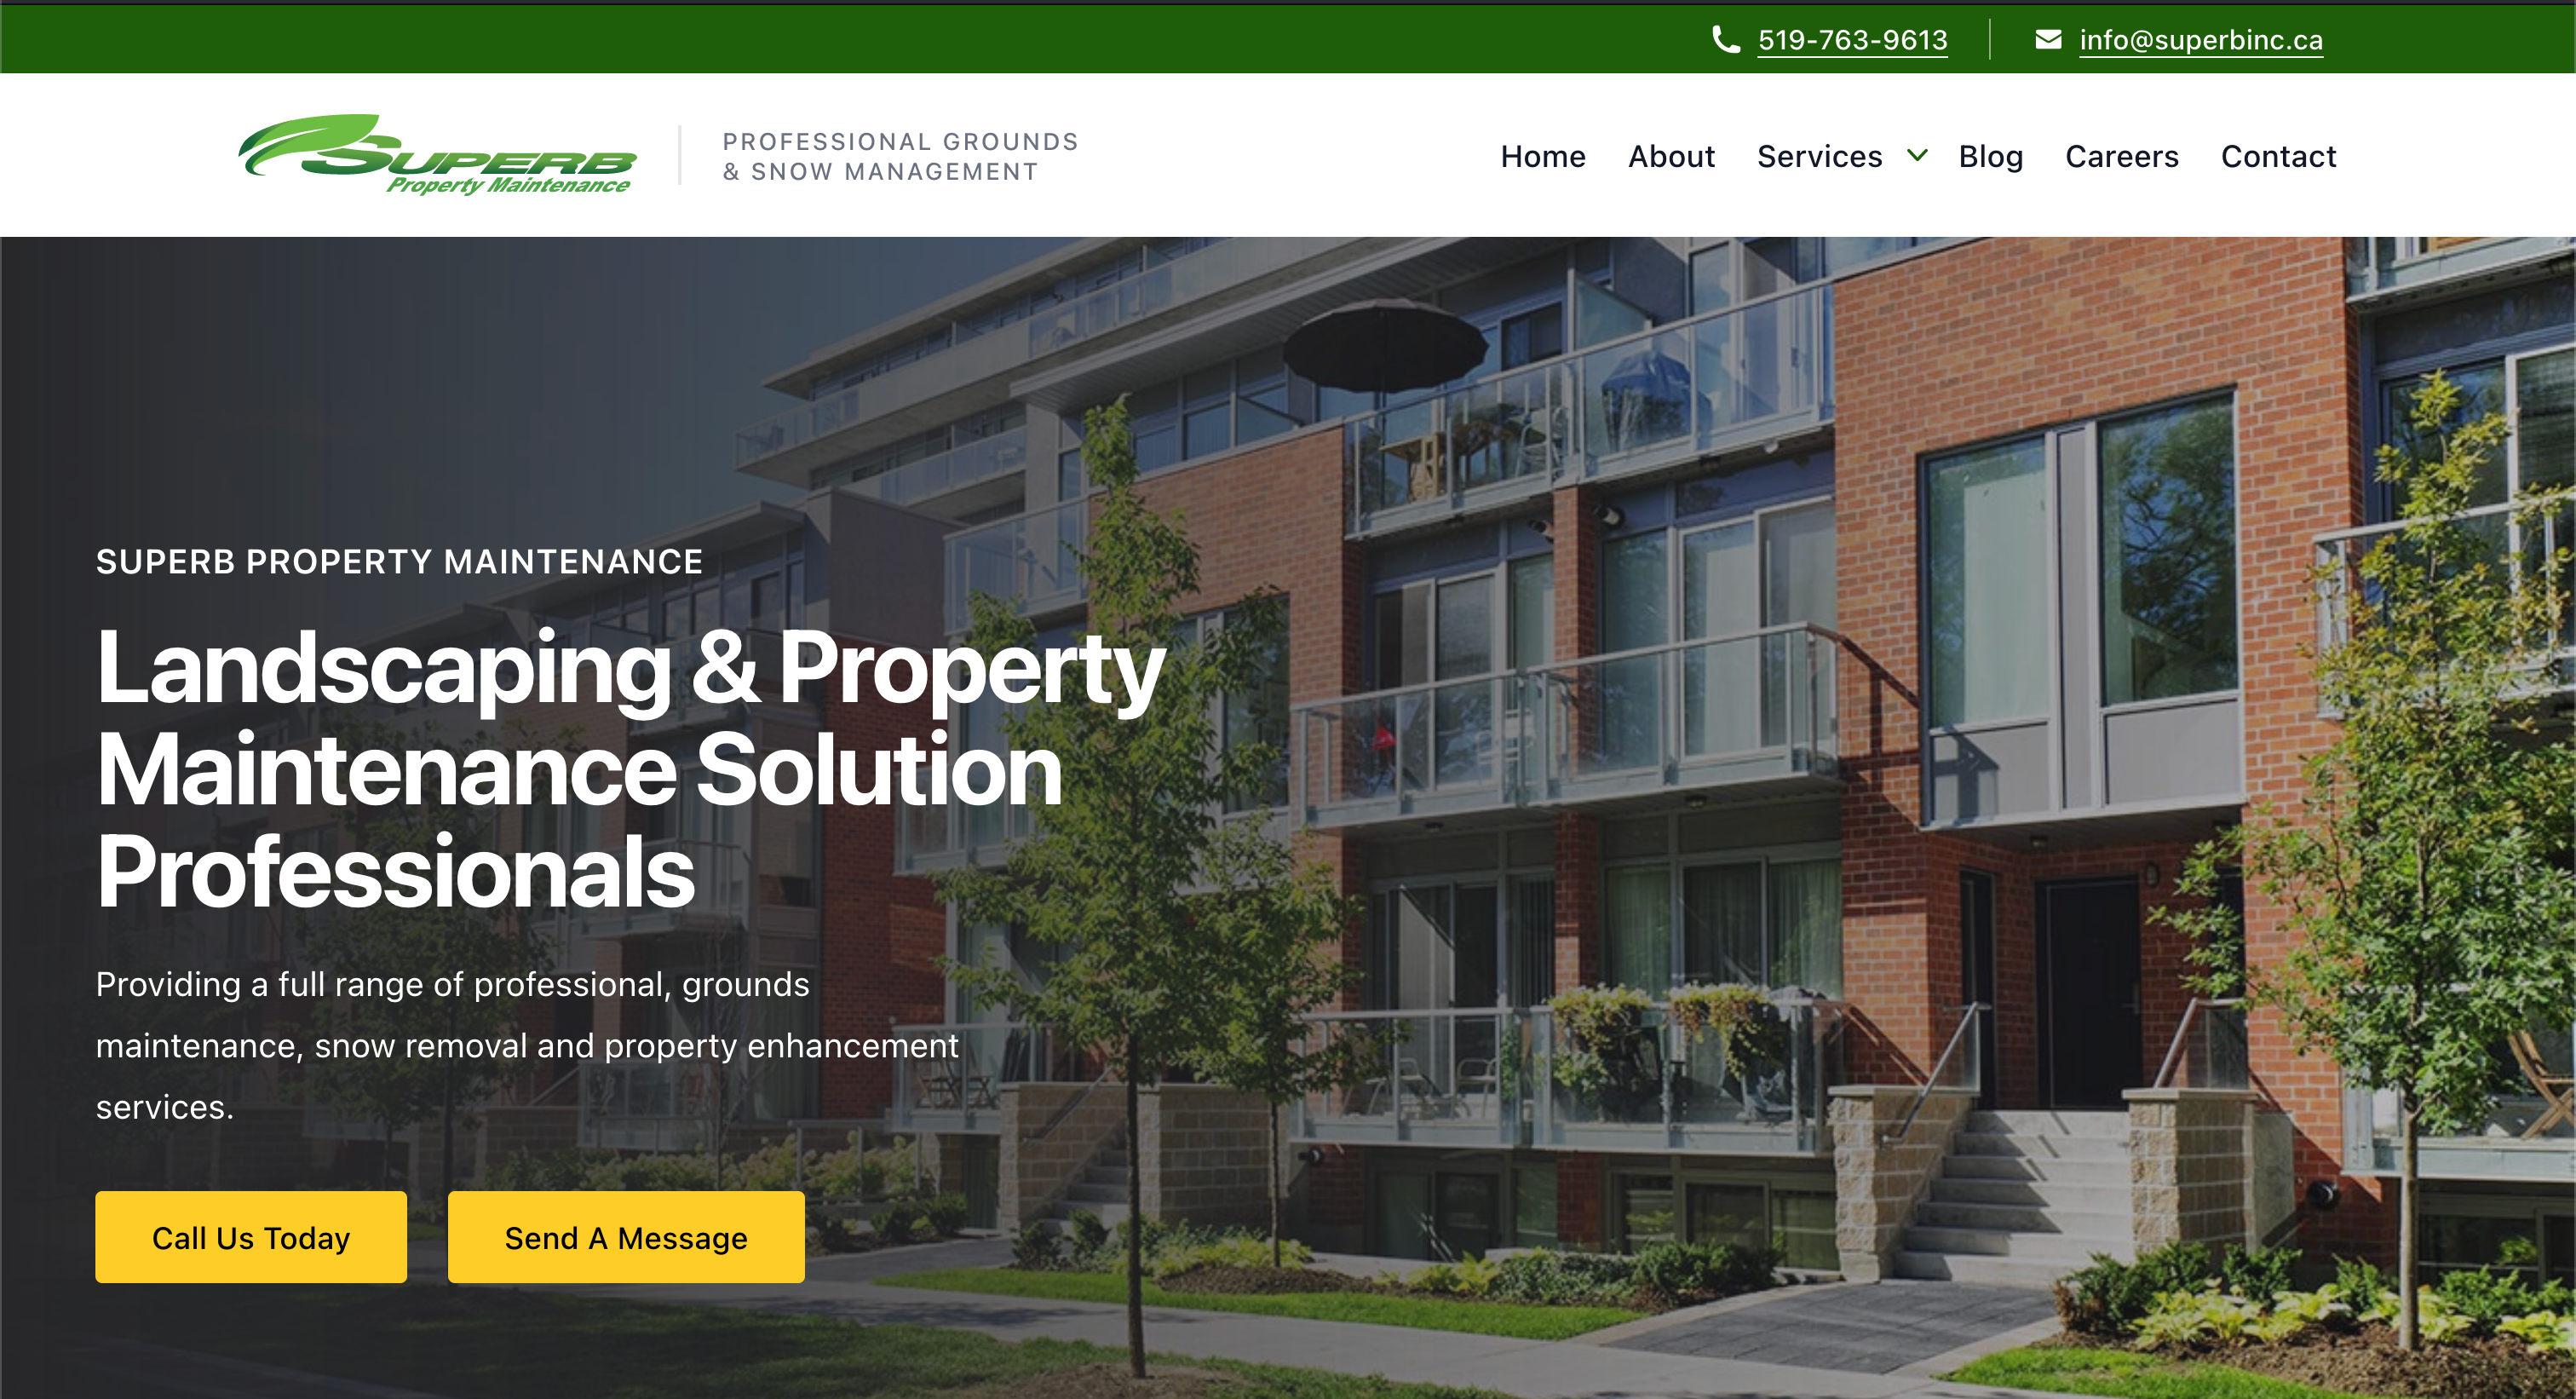 Landing page for superb landscaping - image of building with a text description